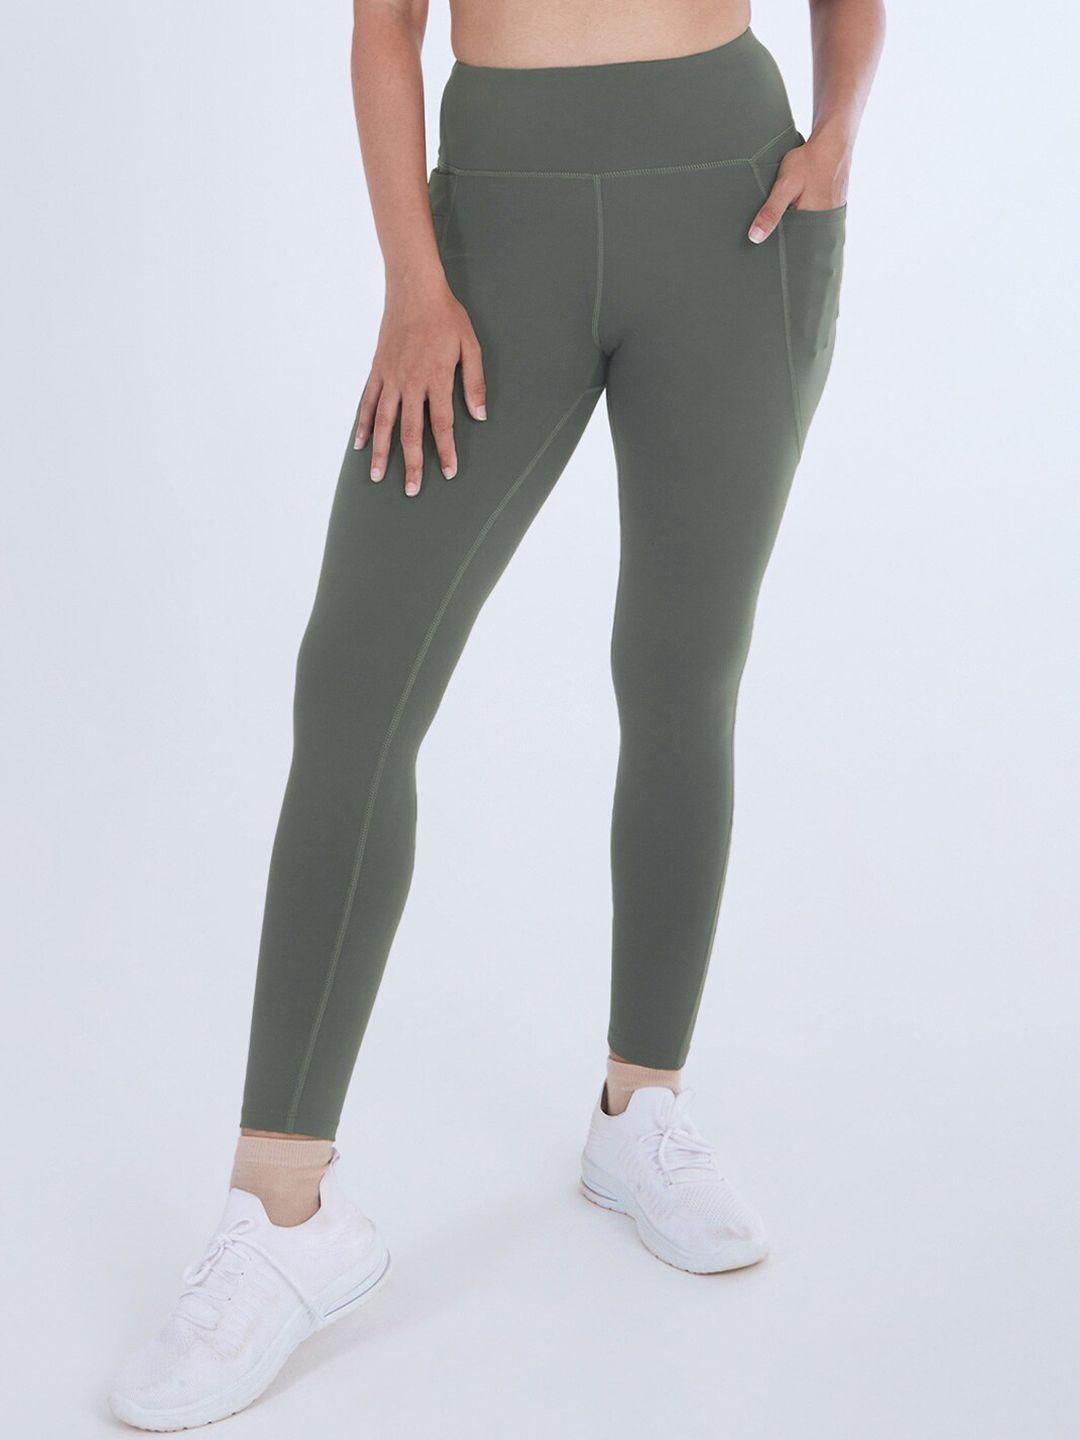 blissclub women olive high waisted leggings with six pockets